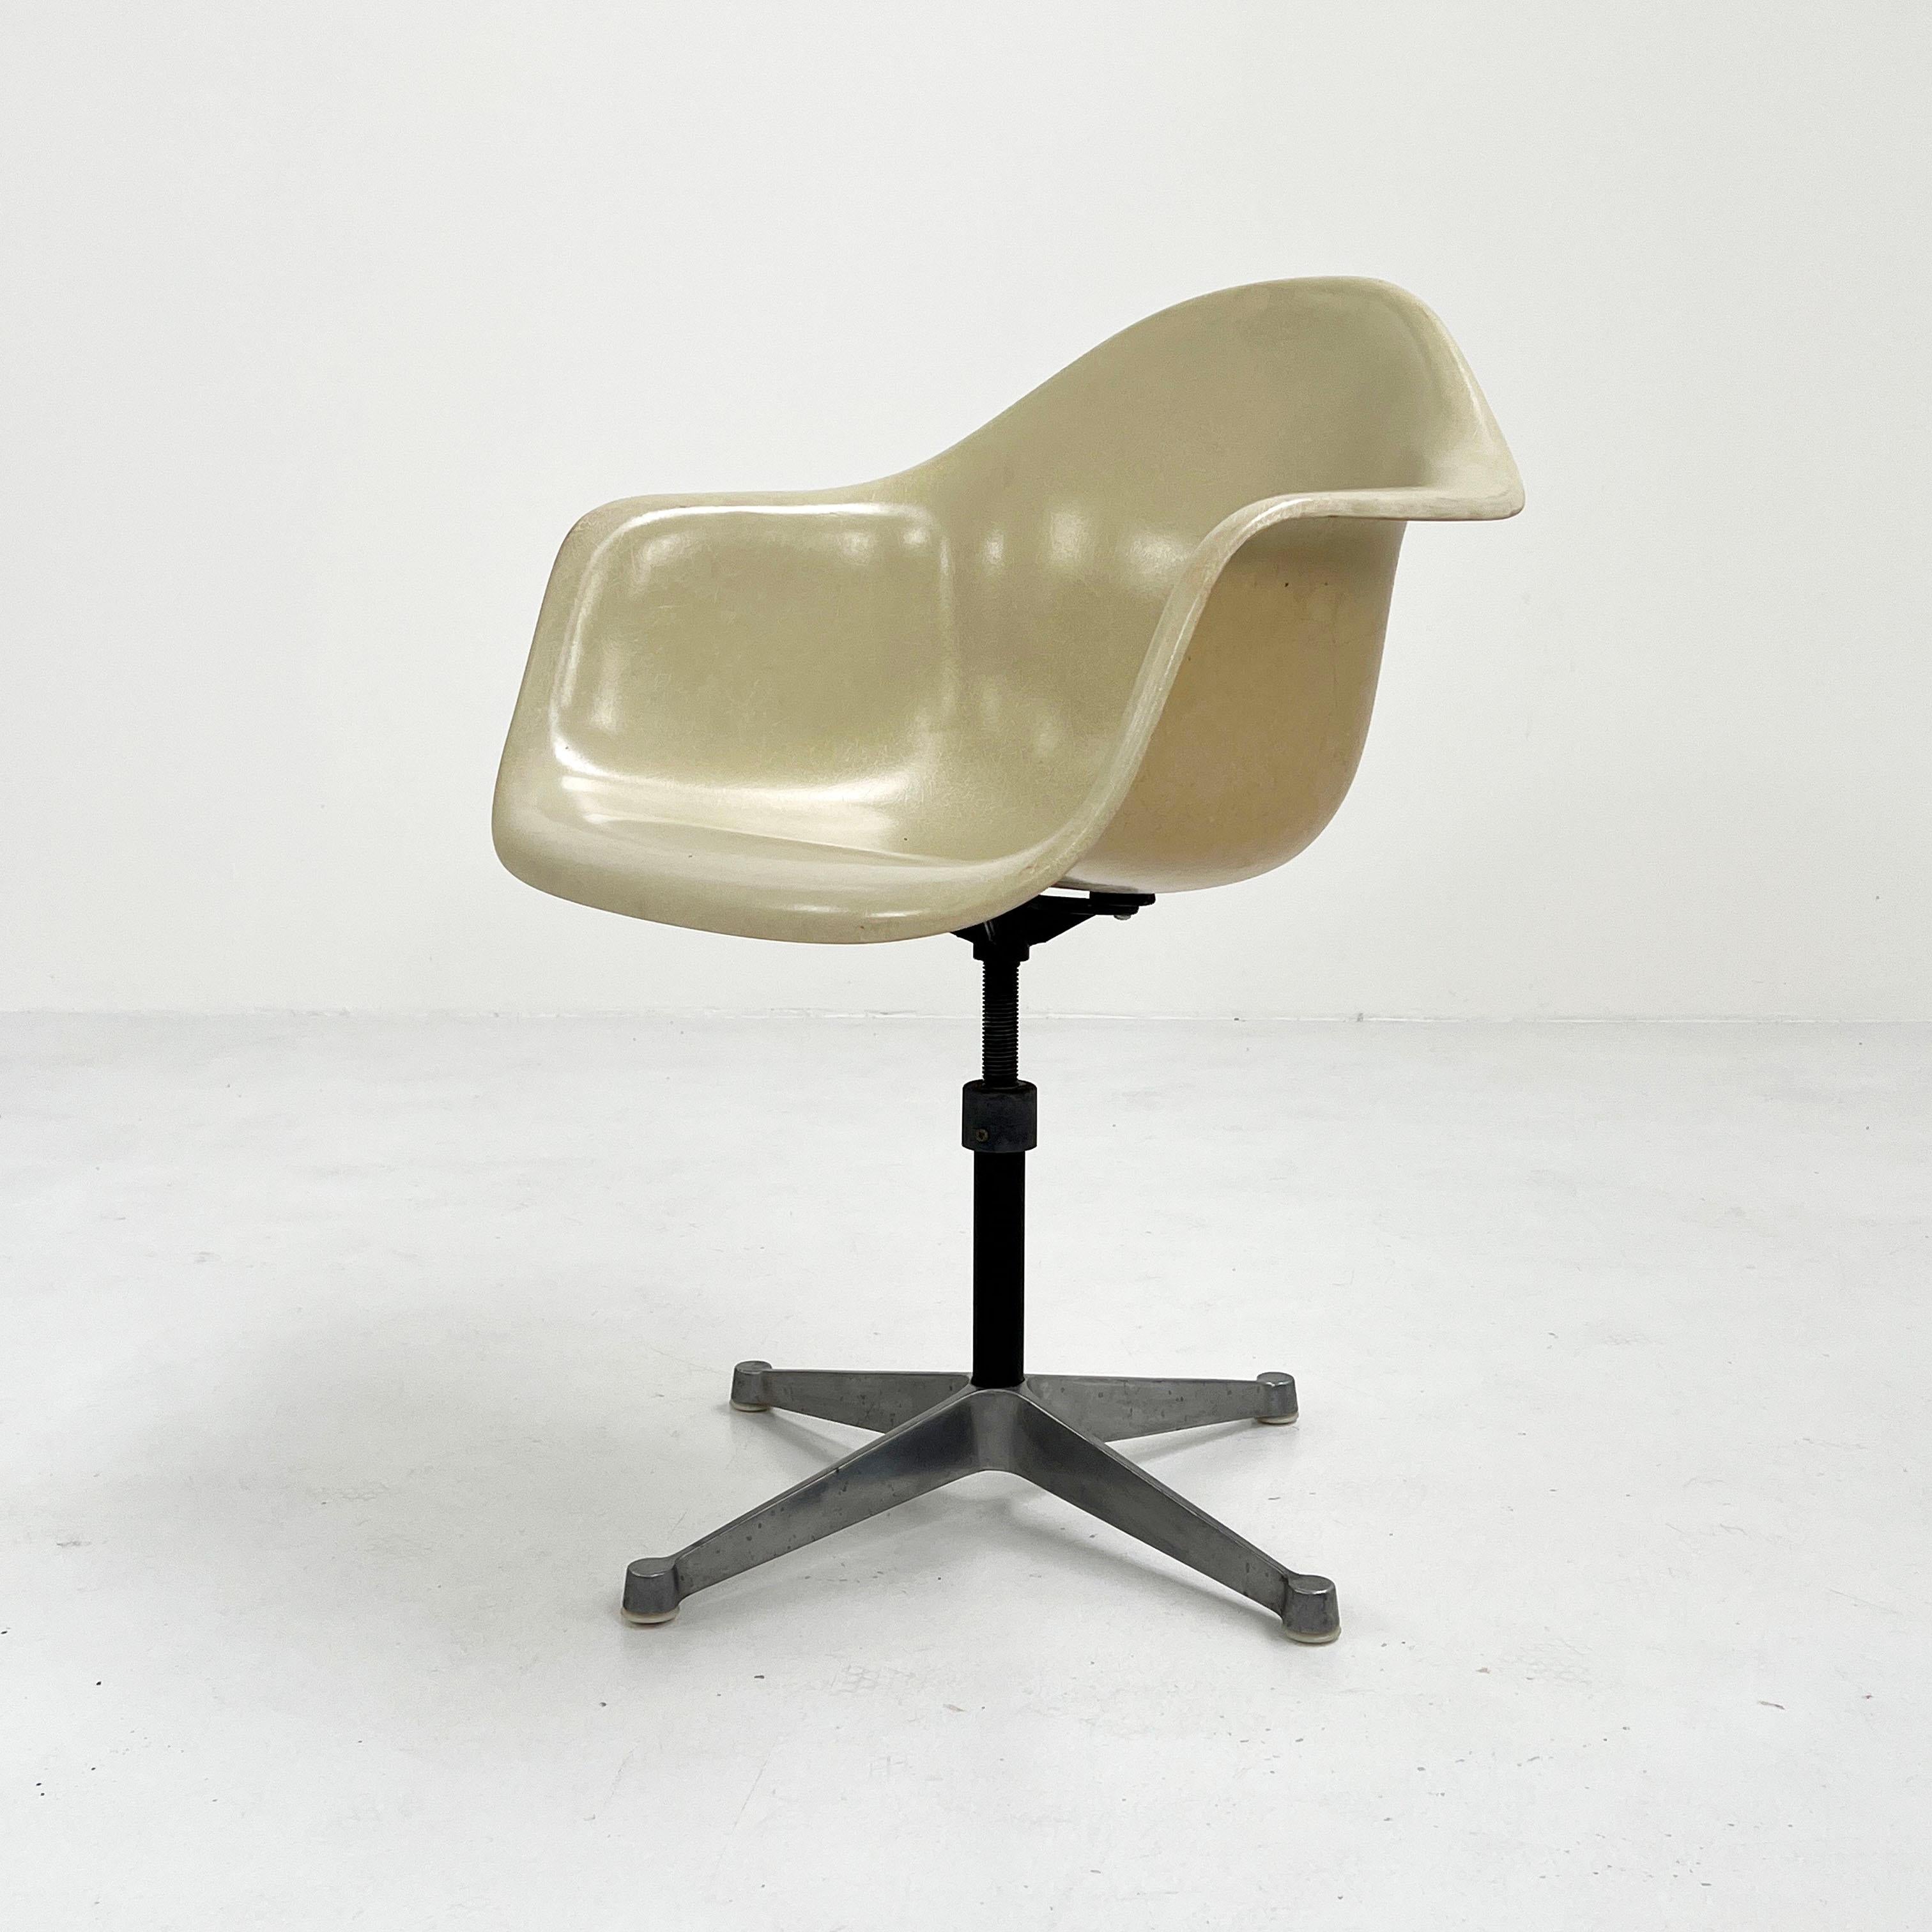 PAC Armchair by Charles & Ray Eames for Herman Miller, 1960s
Designer - Charles and Ray Eames
Producer - Herman Miller
Model - PAC 
Design Period - Sixties
Measurements - width 63 cm x depth 55 cm x height 86 cm x seat height 47 cm
Materials -